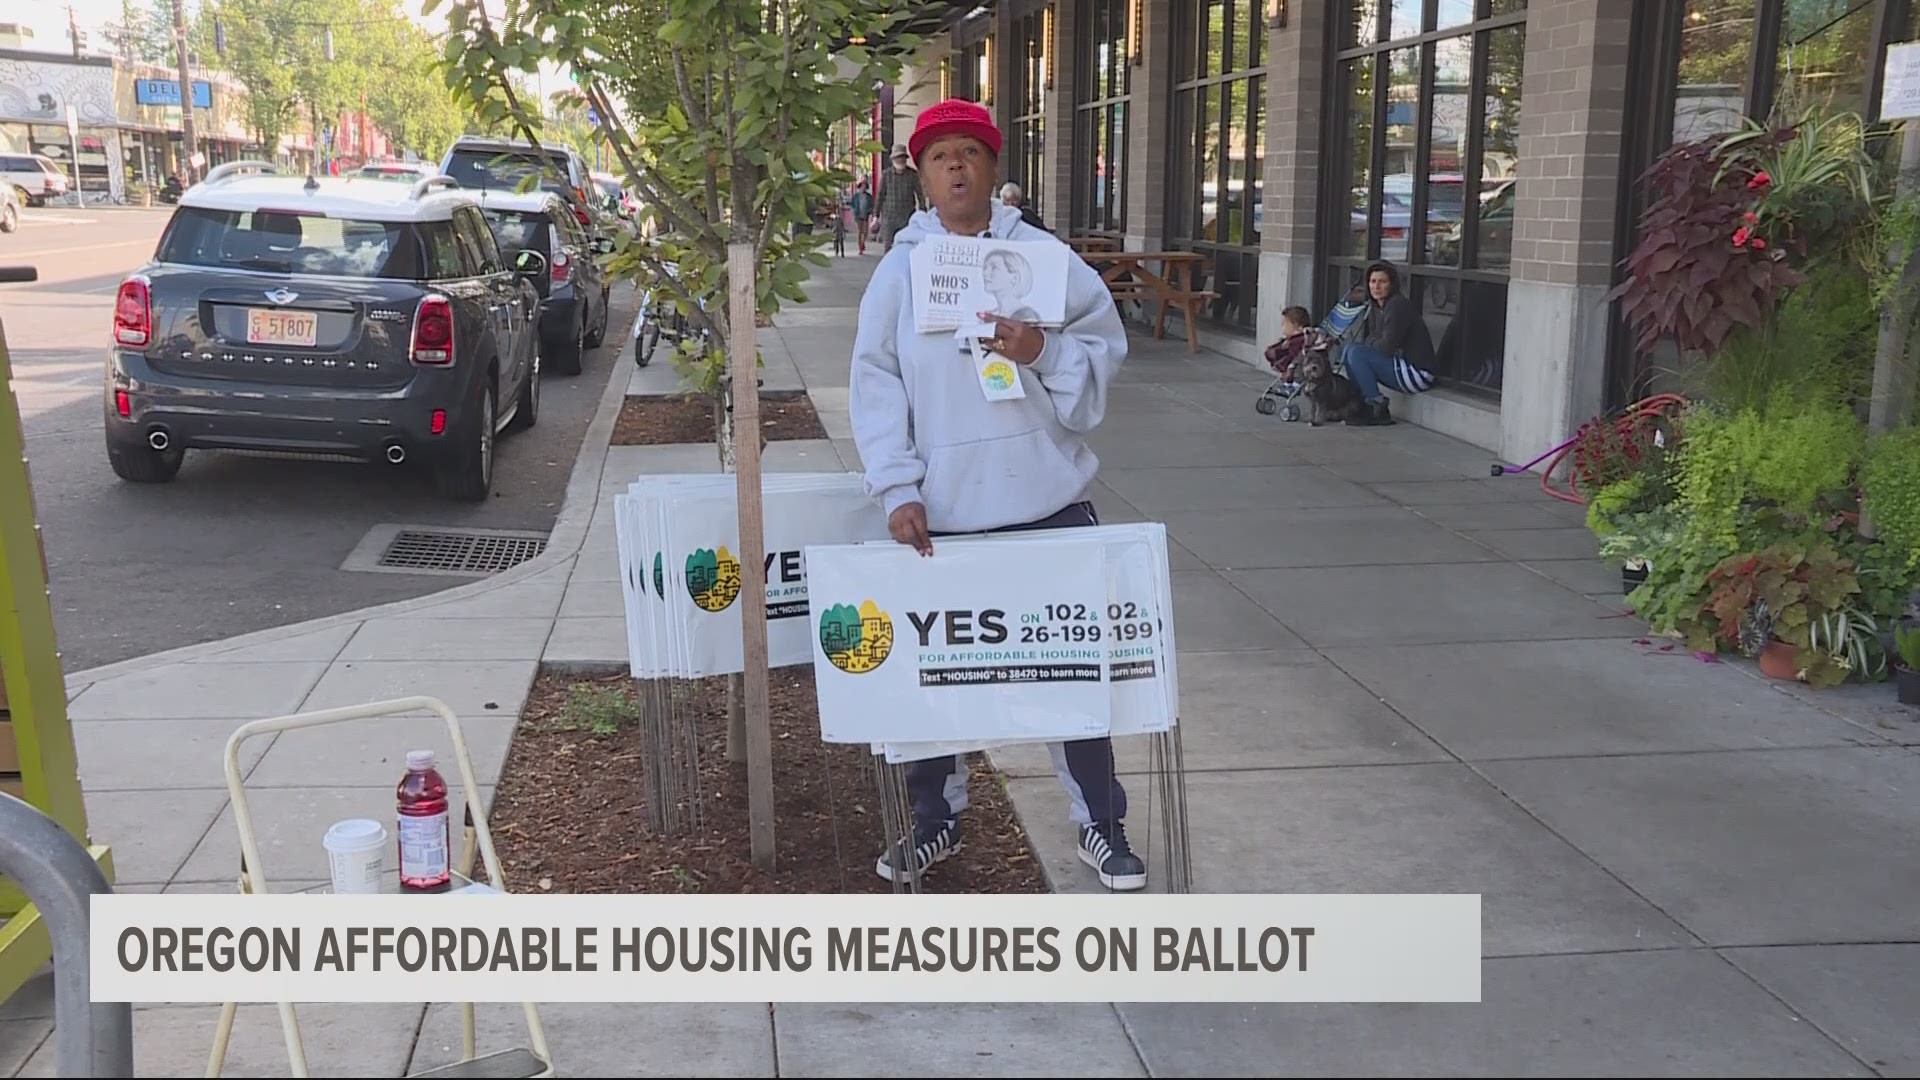 YouTube Annette "Nettie" Johnson, once homeless, campaigns for ballot measures that are intended to create affordable housing.